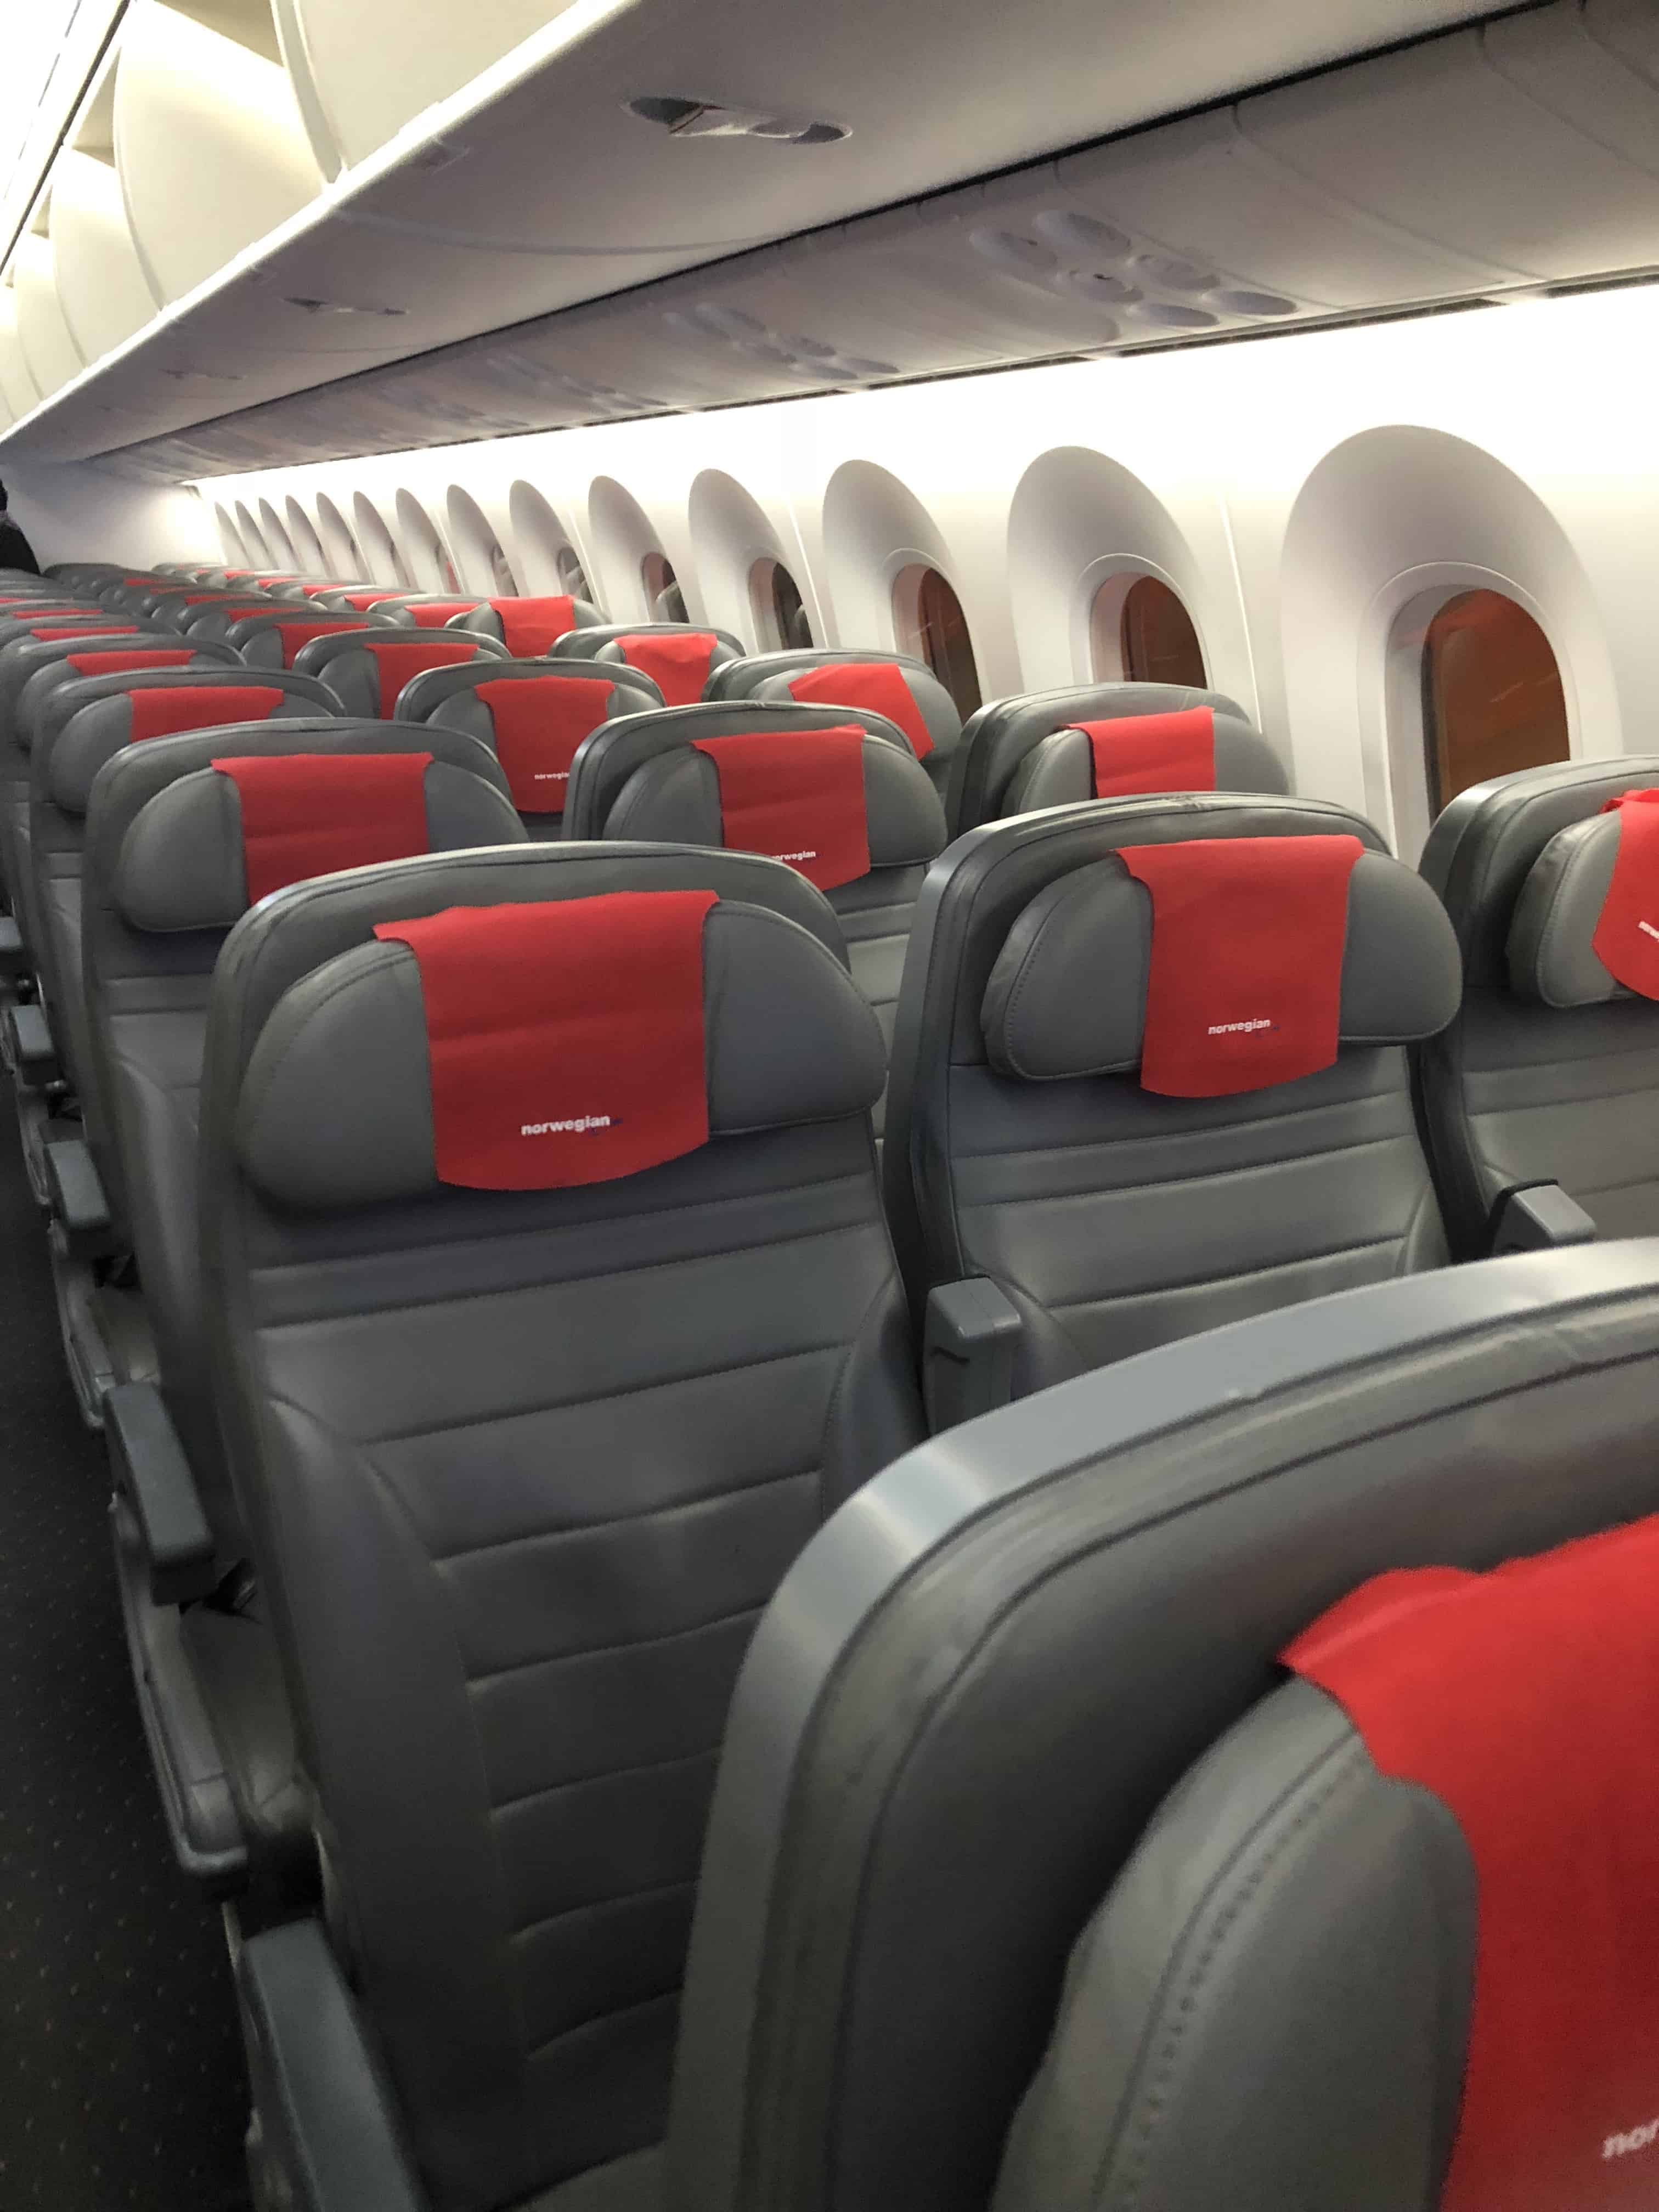 5 Reasons You Should Use Norwegian Air for Travel to Europe